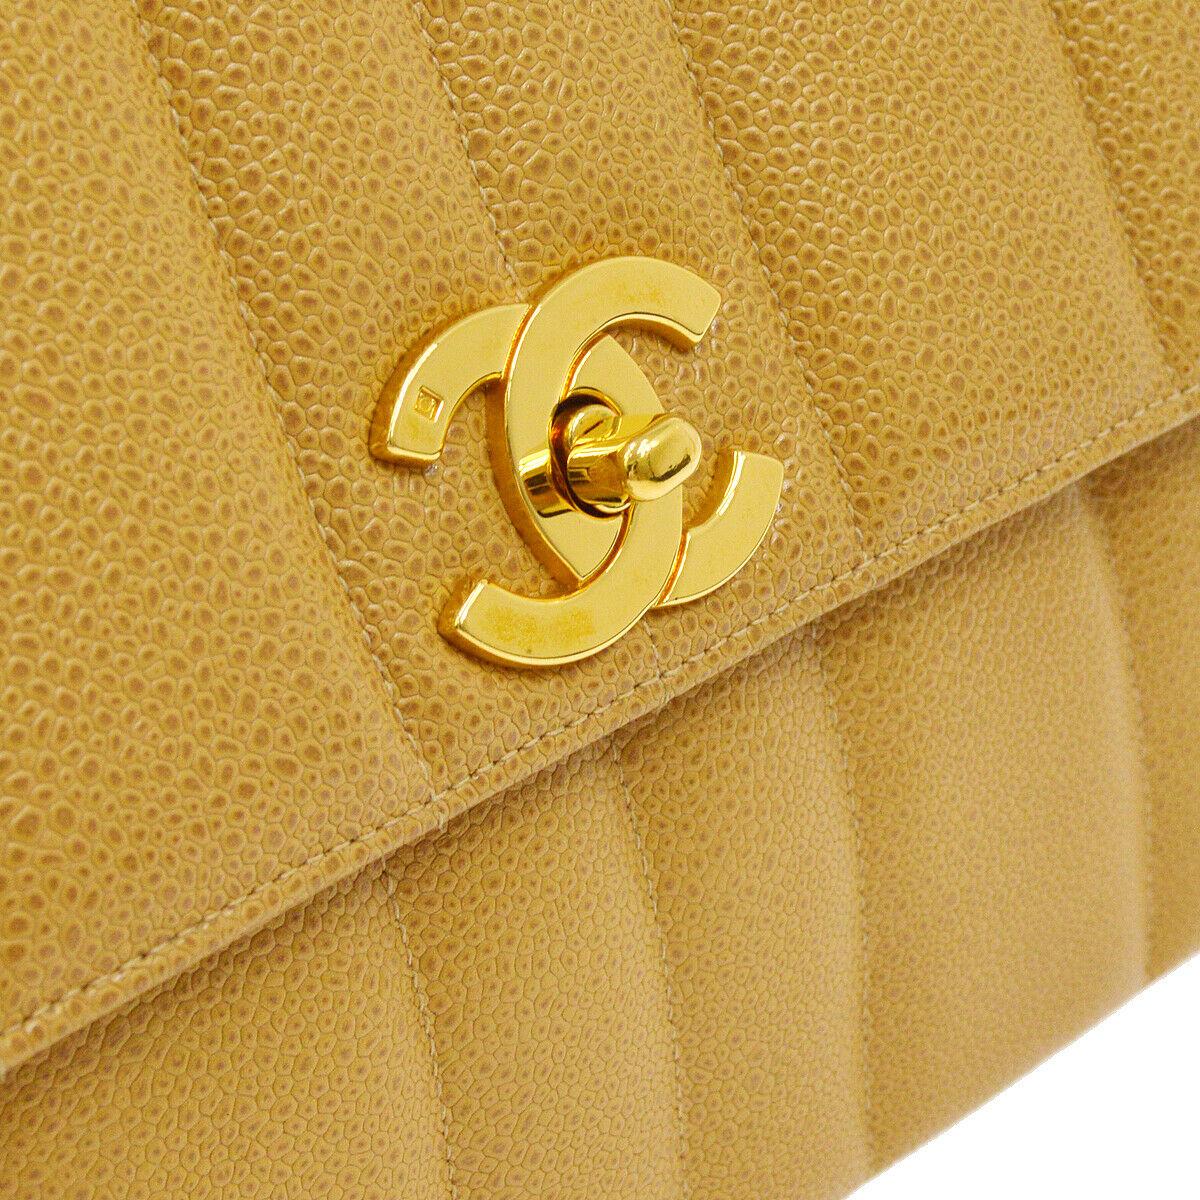 Chanel Nude Tan Caviar Leather Gold Evening Shoulder Flap Bag

Caviar leather
Gold tone hardware
Leather lining 
Made in France
Shoulder strap drop 16